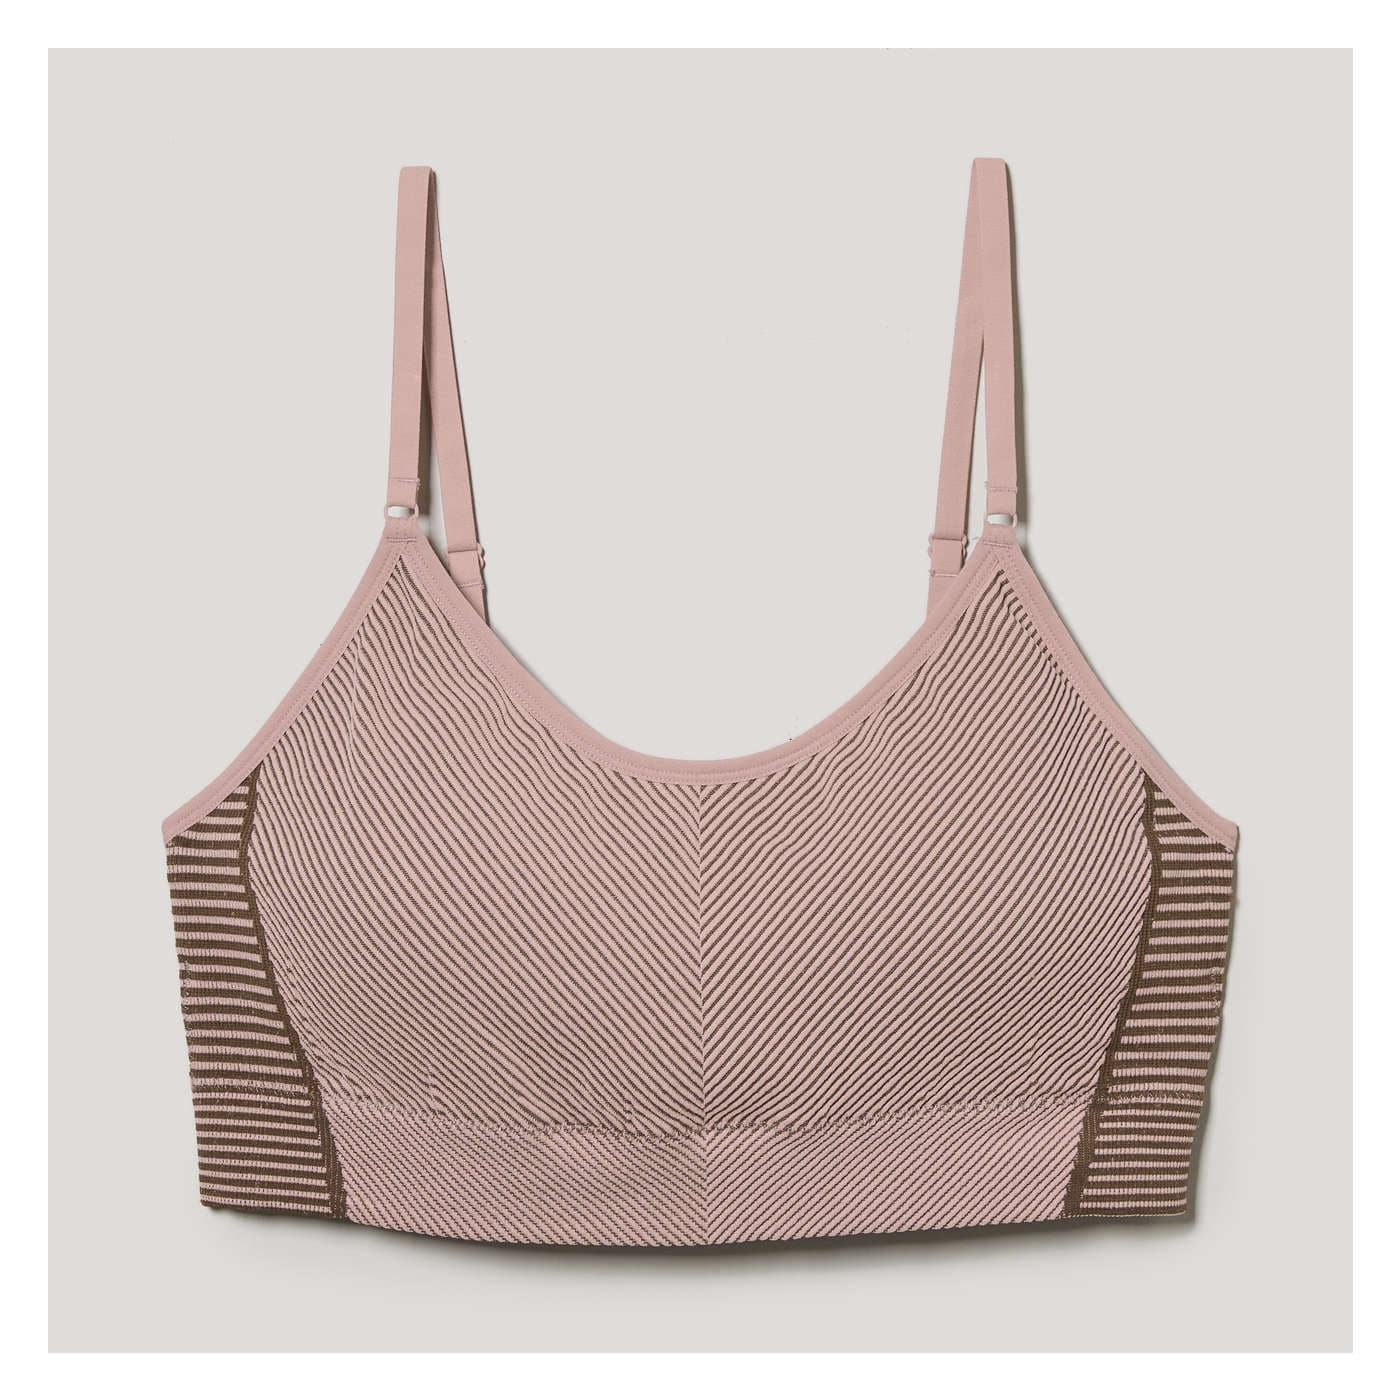 Buy super.natural - Women's Super Top - Sports bra size 36 - S, pink- find  codes and free shipping